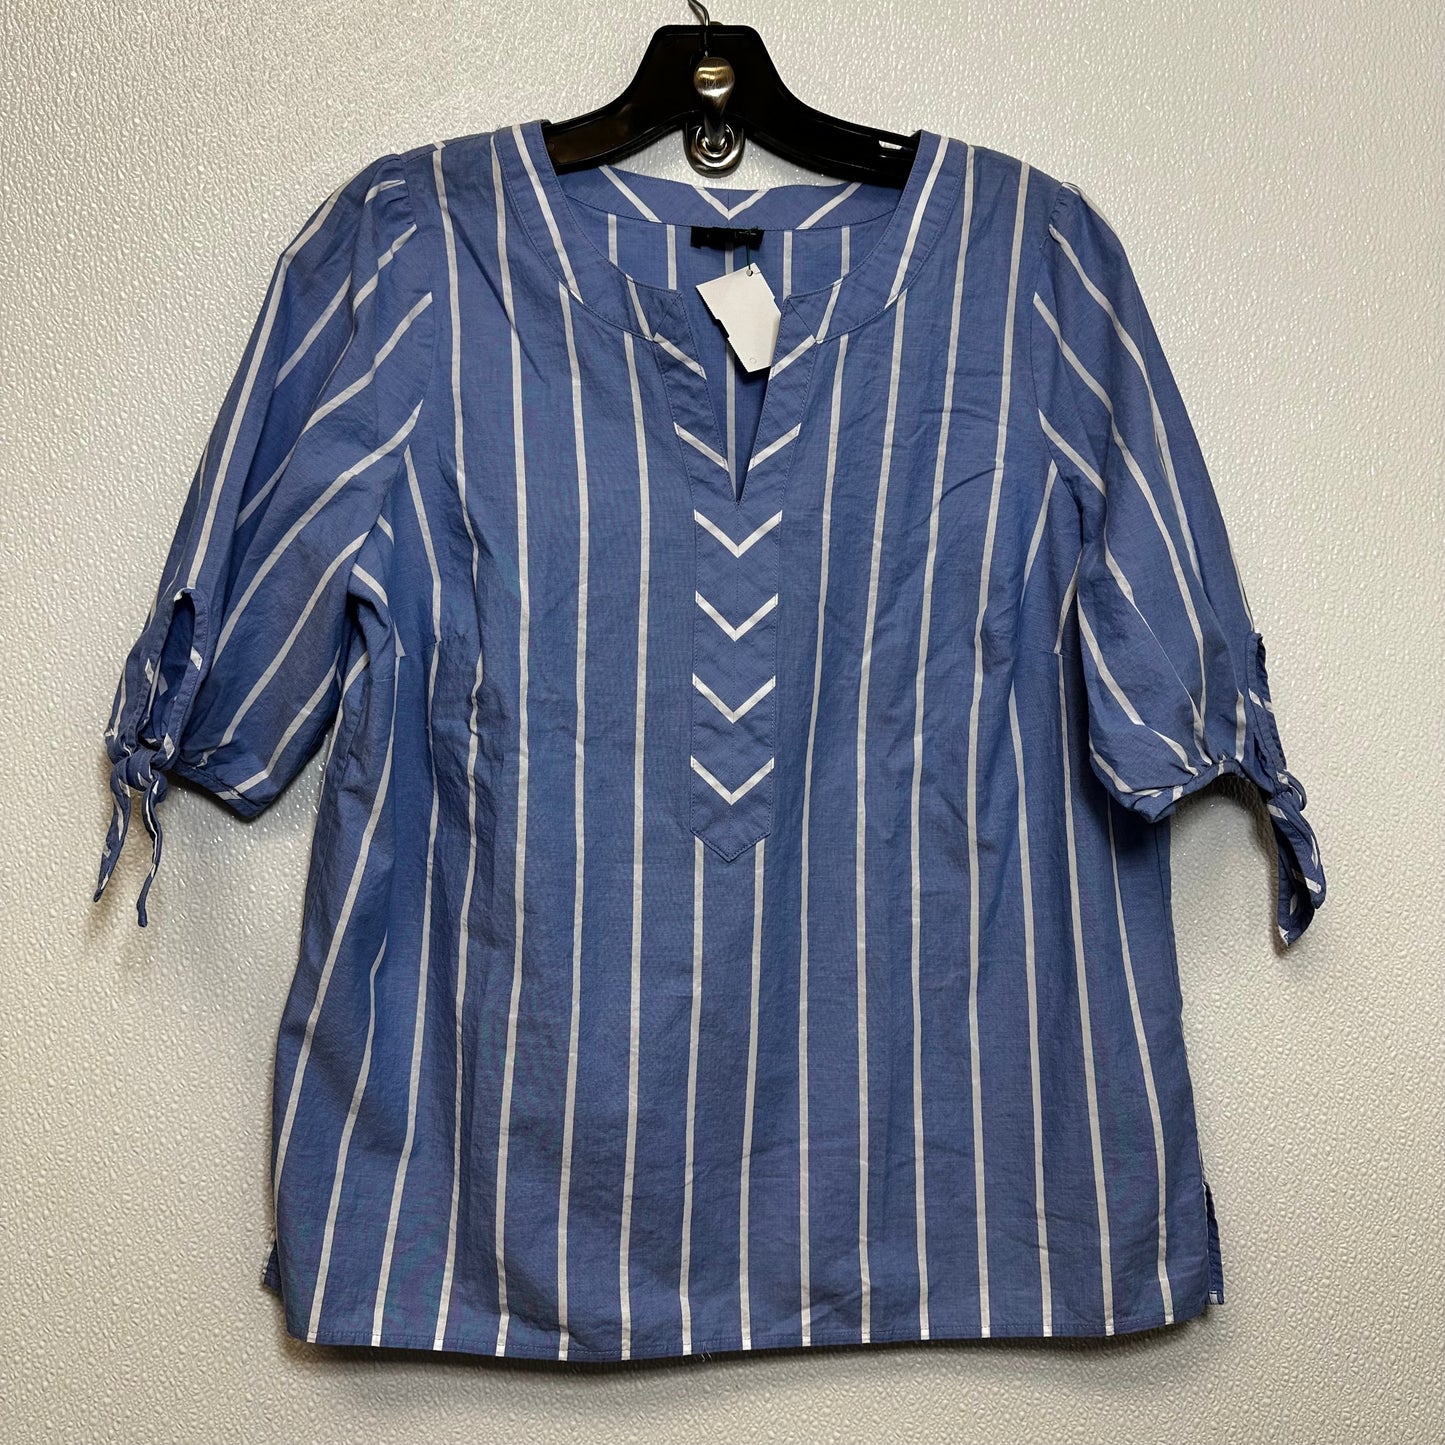 Striped Top Short Sleeve Talbots O, Size M